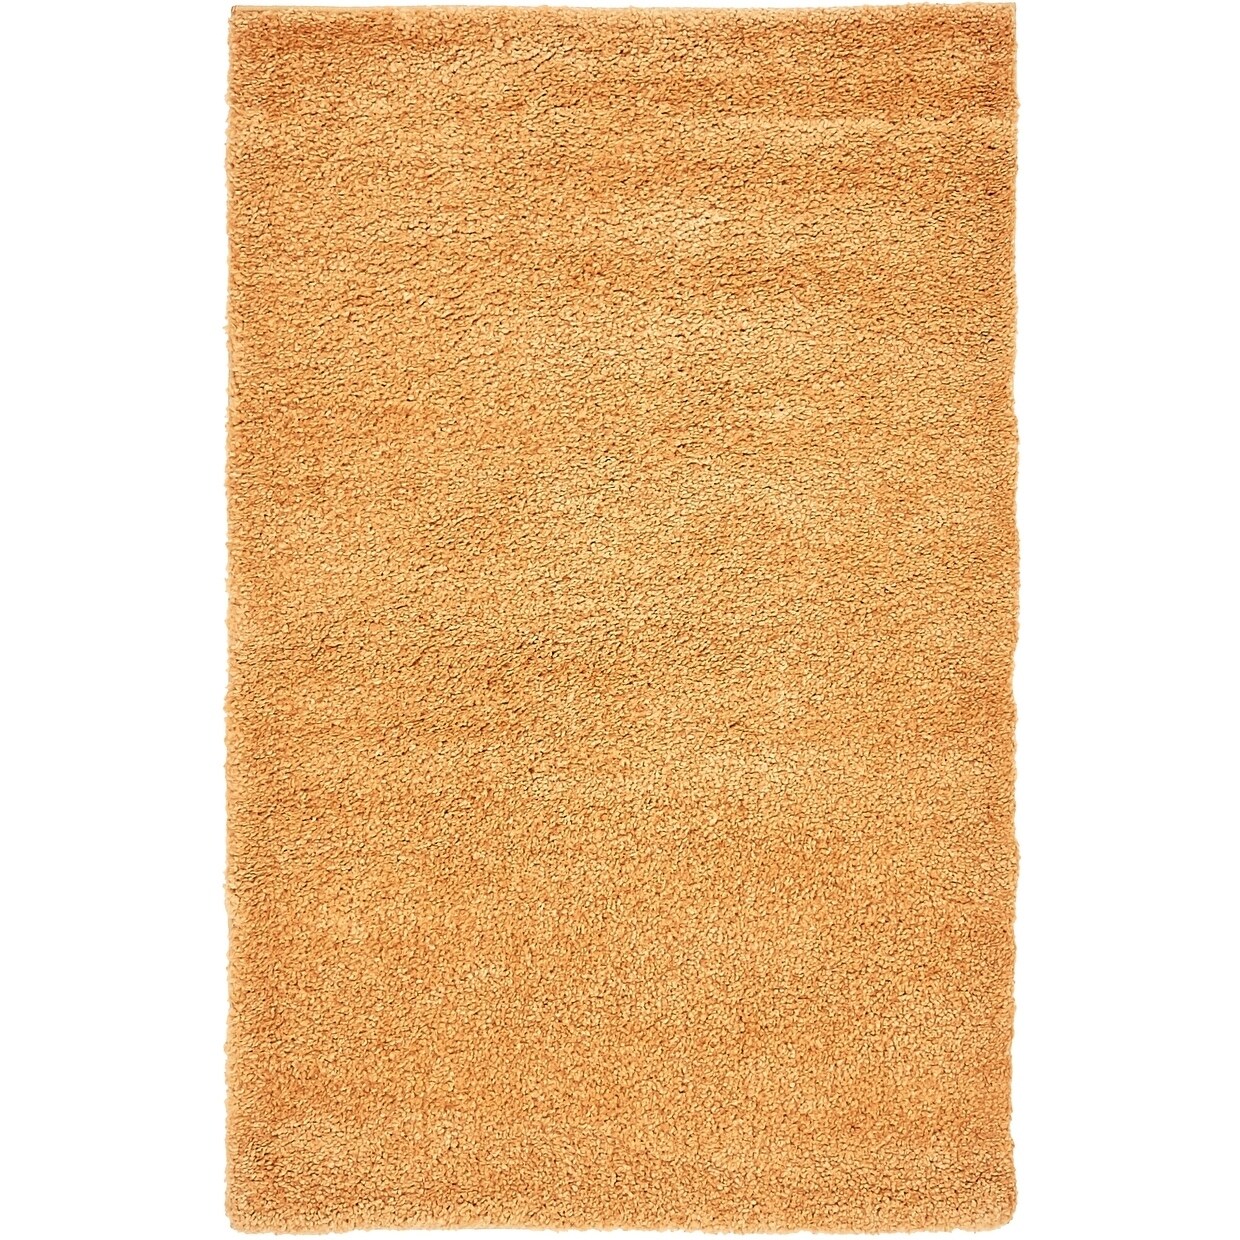 Buy Orange Area Rugs Online At Overstockcom Our Best Rugs Deals